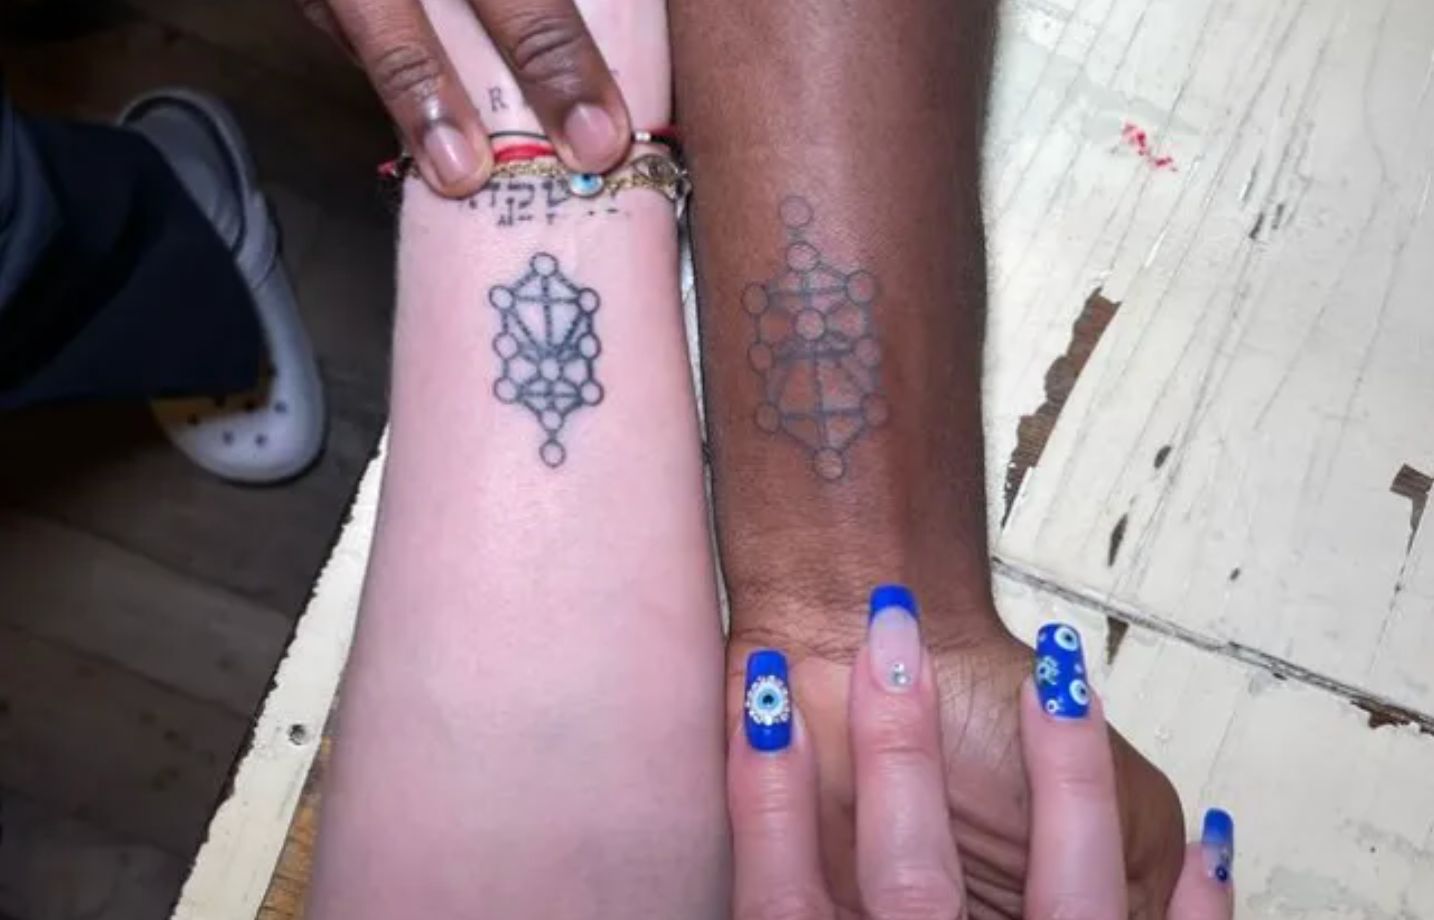 Why Do Couples Get Matching Tattoos?